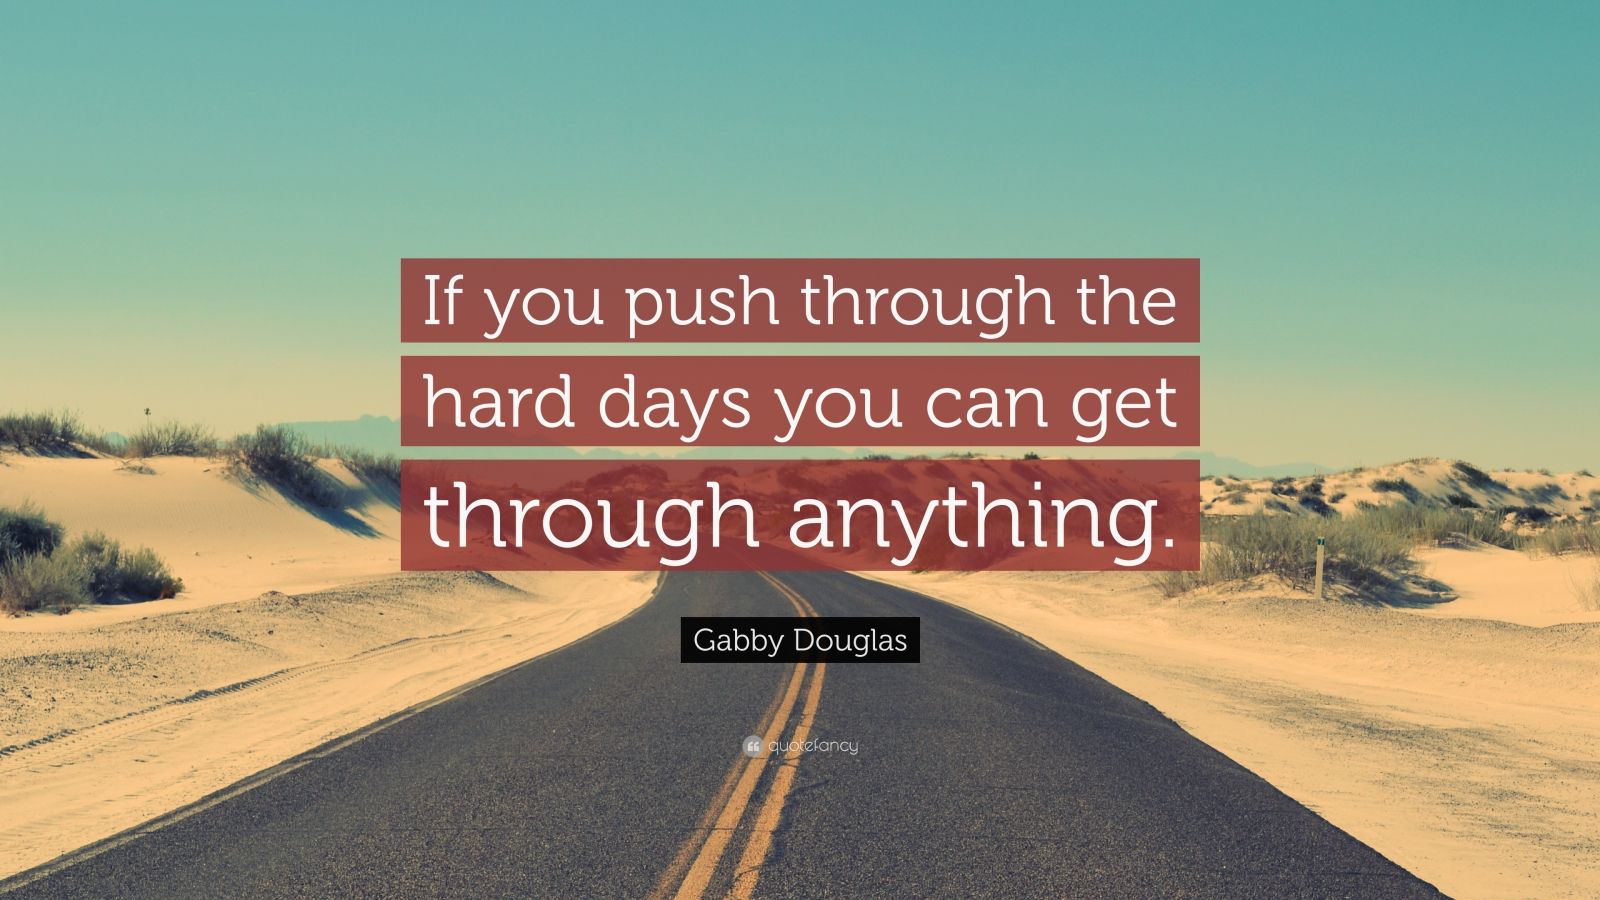 Gabby Douglas Quote “if You Push Through The Hard Days You Can Get Through Anything” 7